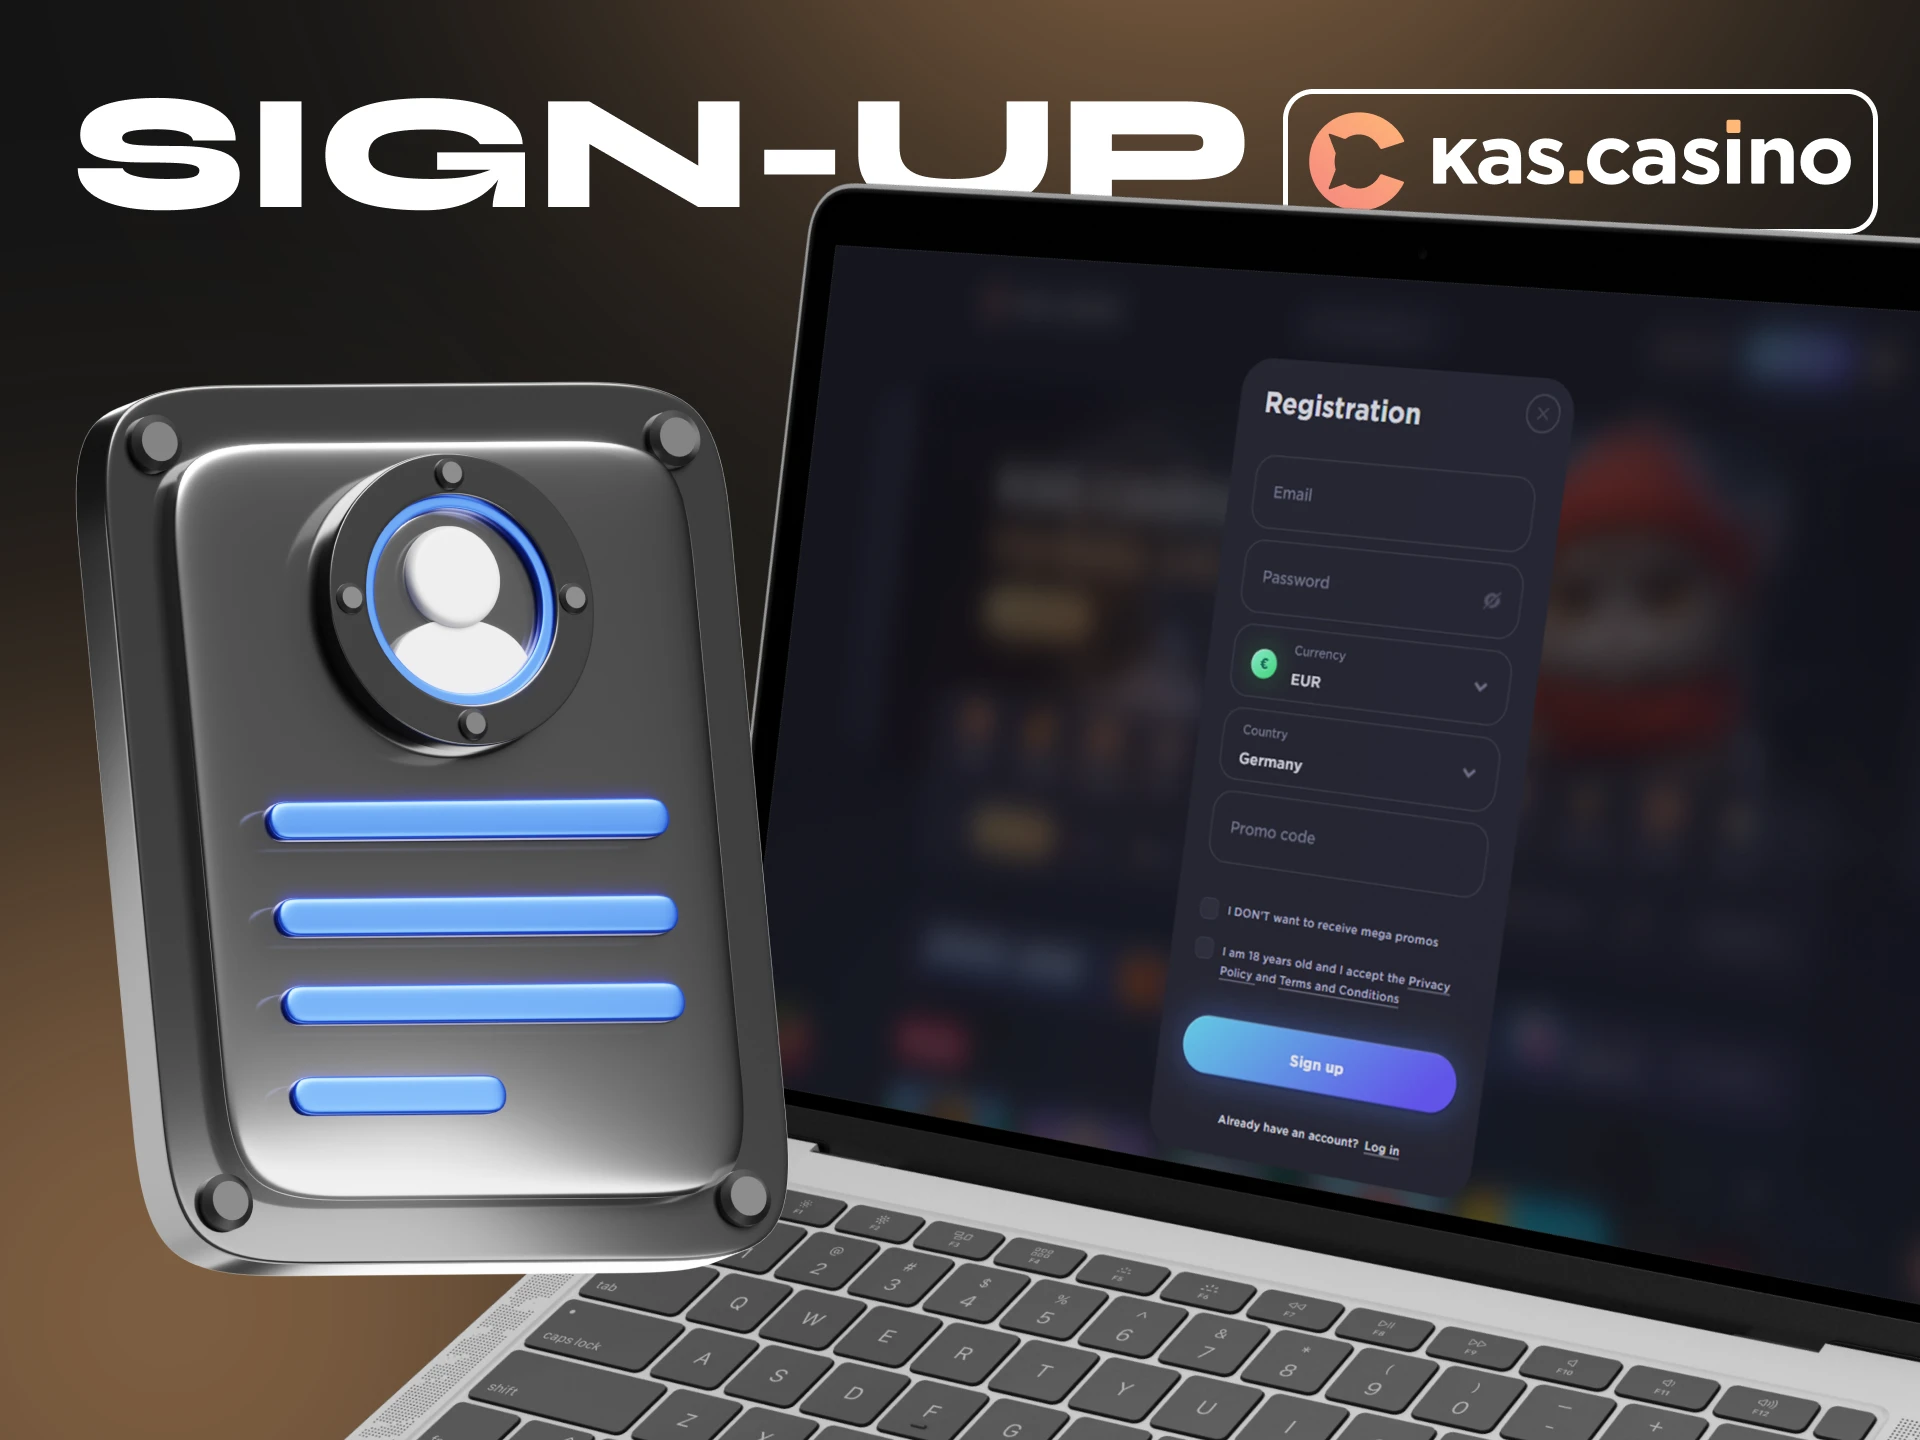 Register to play at Kas Casino.